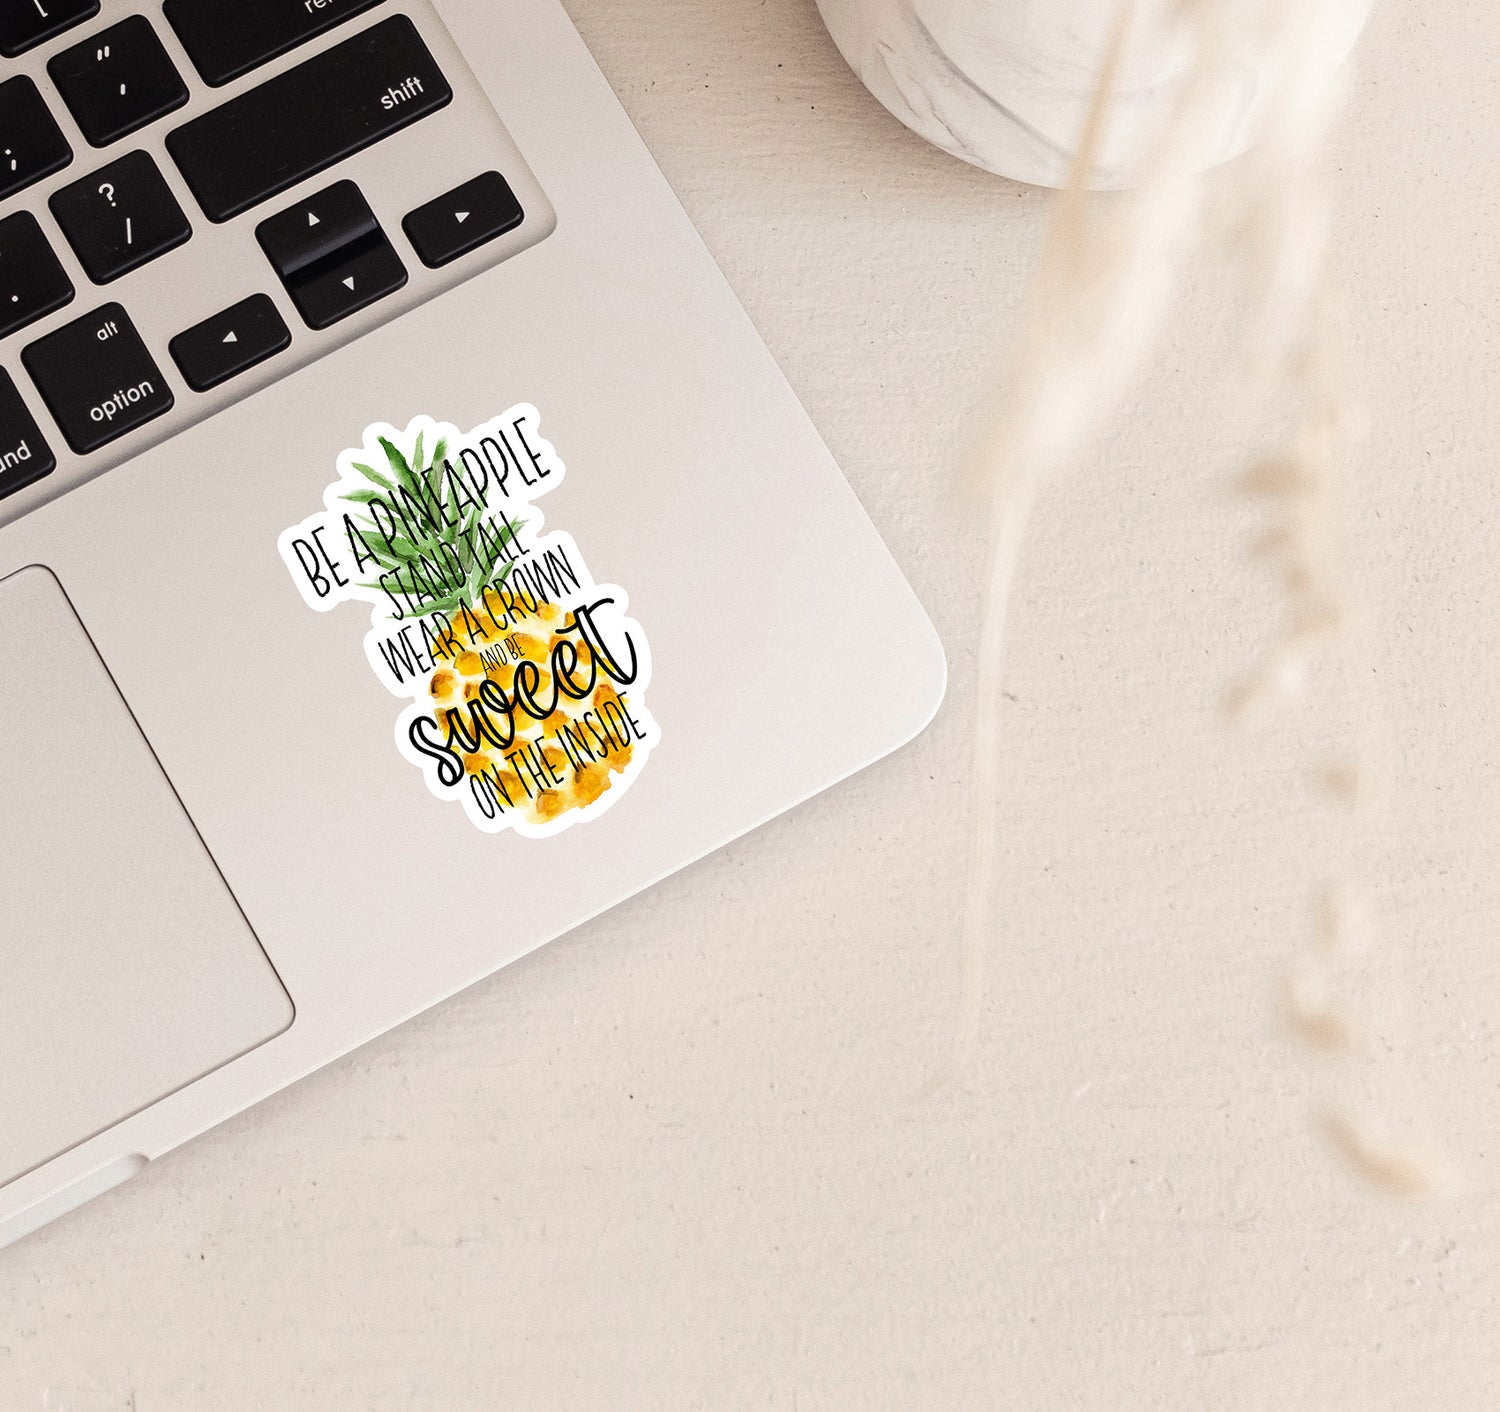 Be a pineapple. Stand tall, wear a crown, and be sweet on the inside laptop sticker